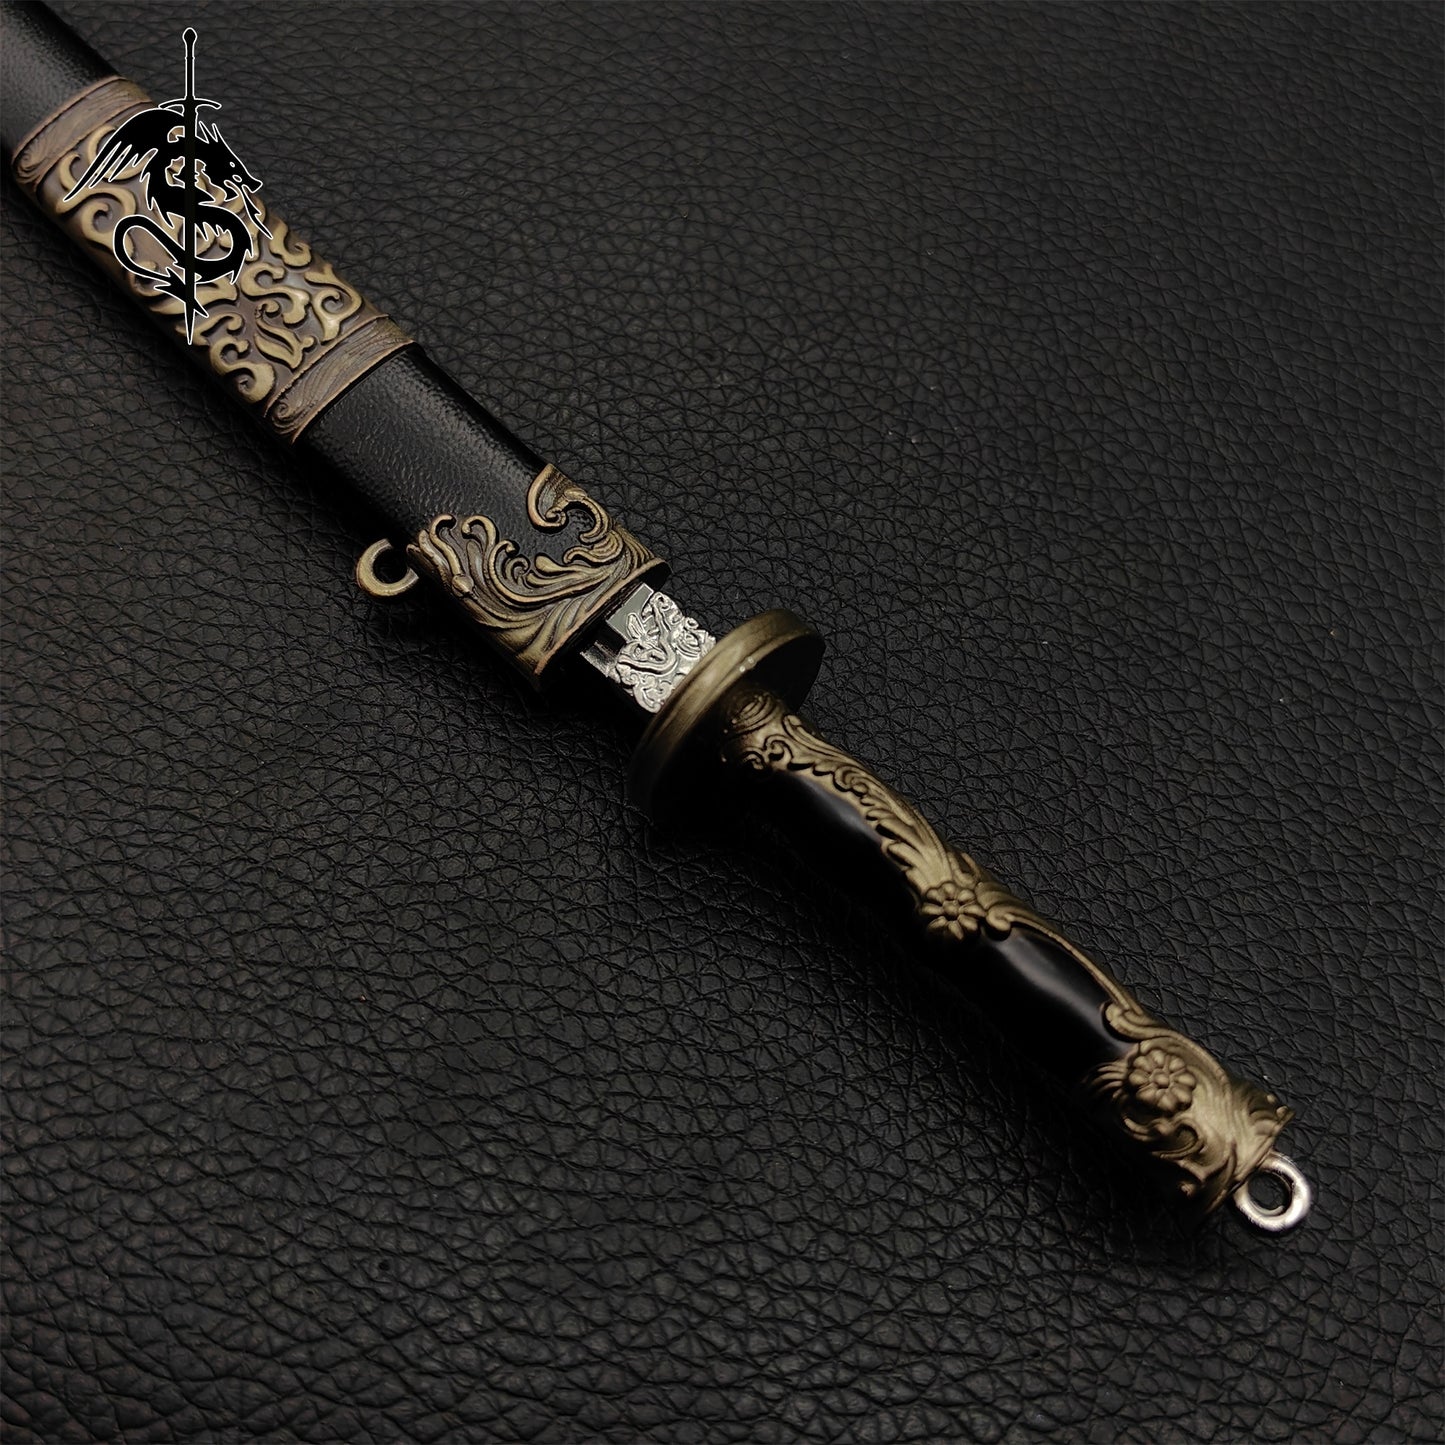 The Imperial Guards Of Ming Dynasty Brotherhood Of Blades Mini Sword